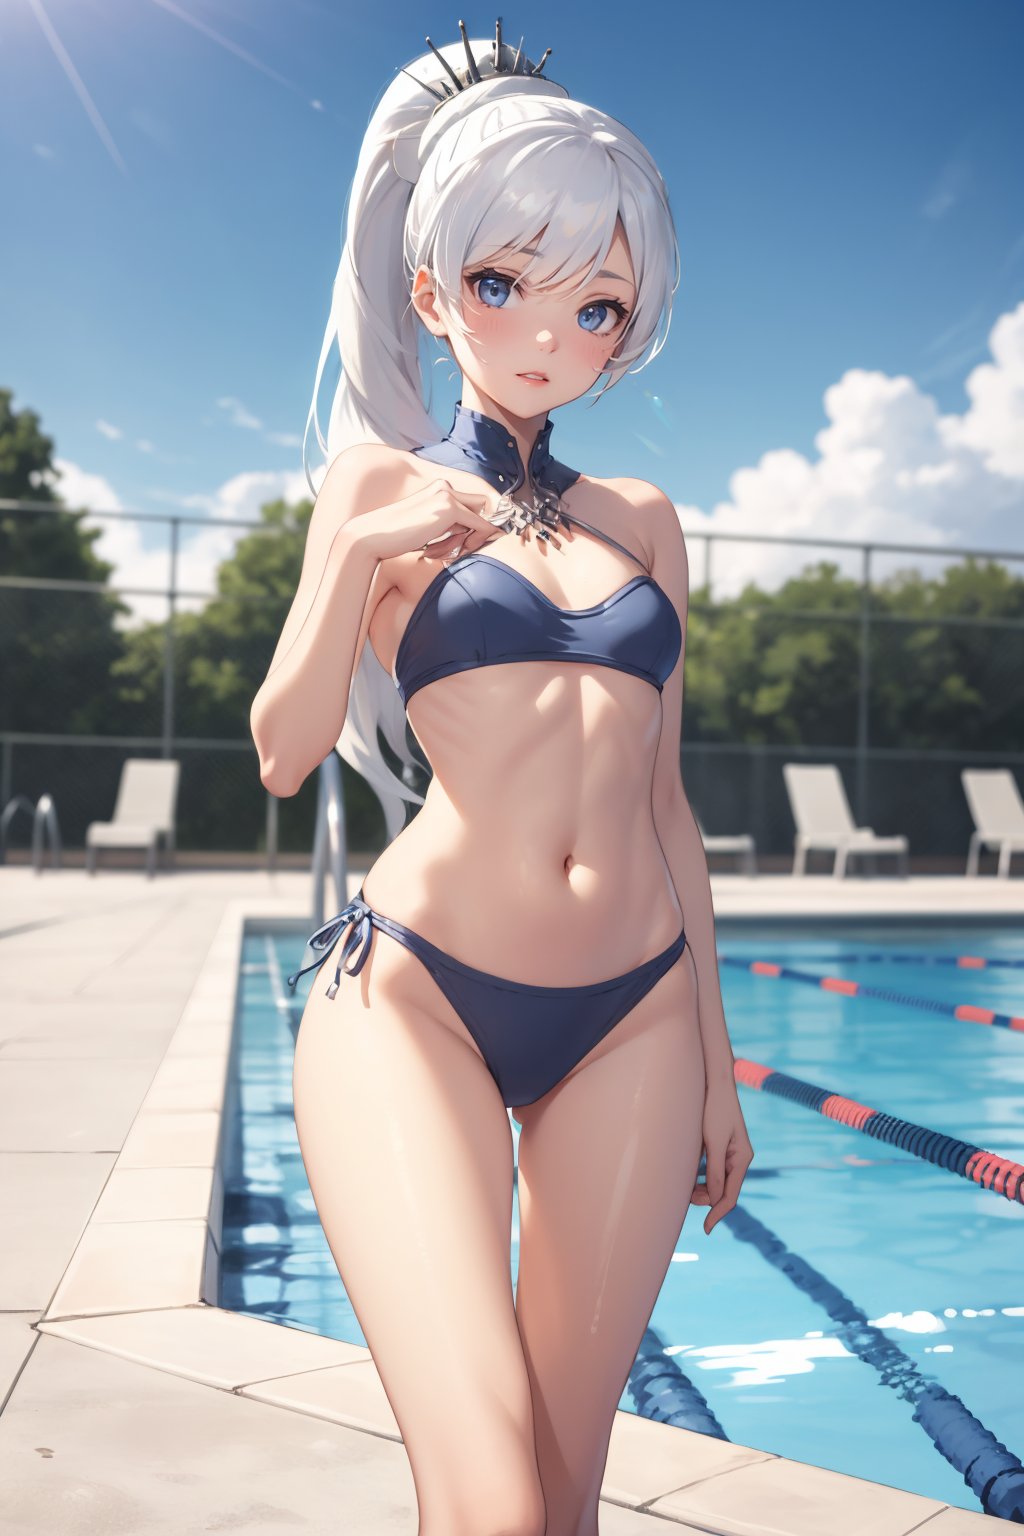 Medium shot), alone, 1 girl, colorful image, Swissvale, outside, pool, small smile, looking at viewer, ponytail, scar on eye, Weiss Mistral, weiss_schnee, swimsuit